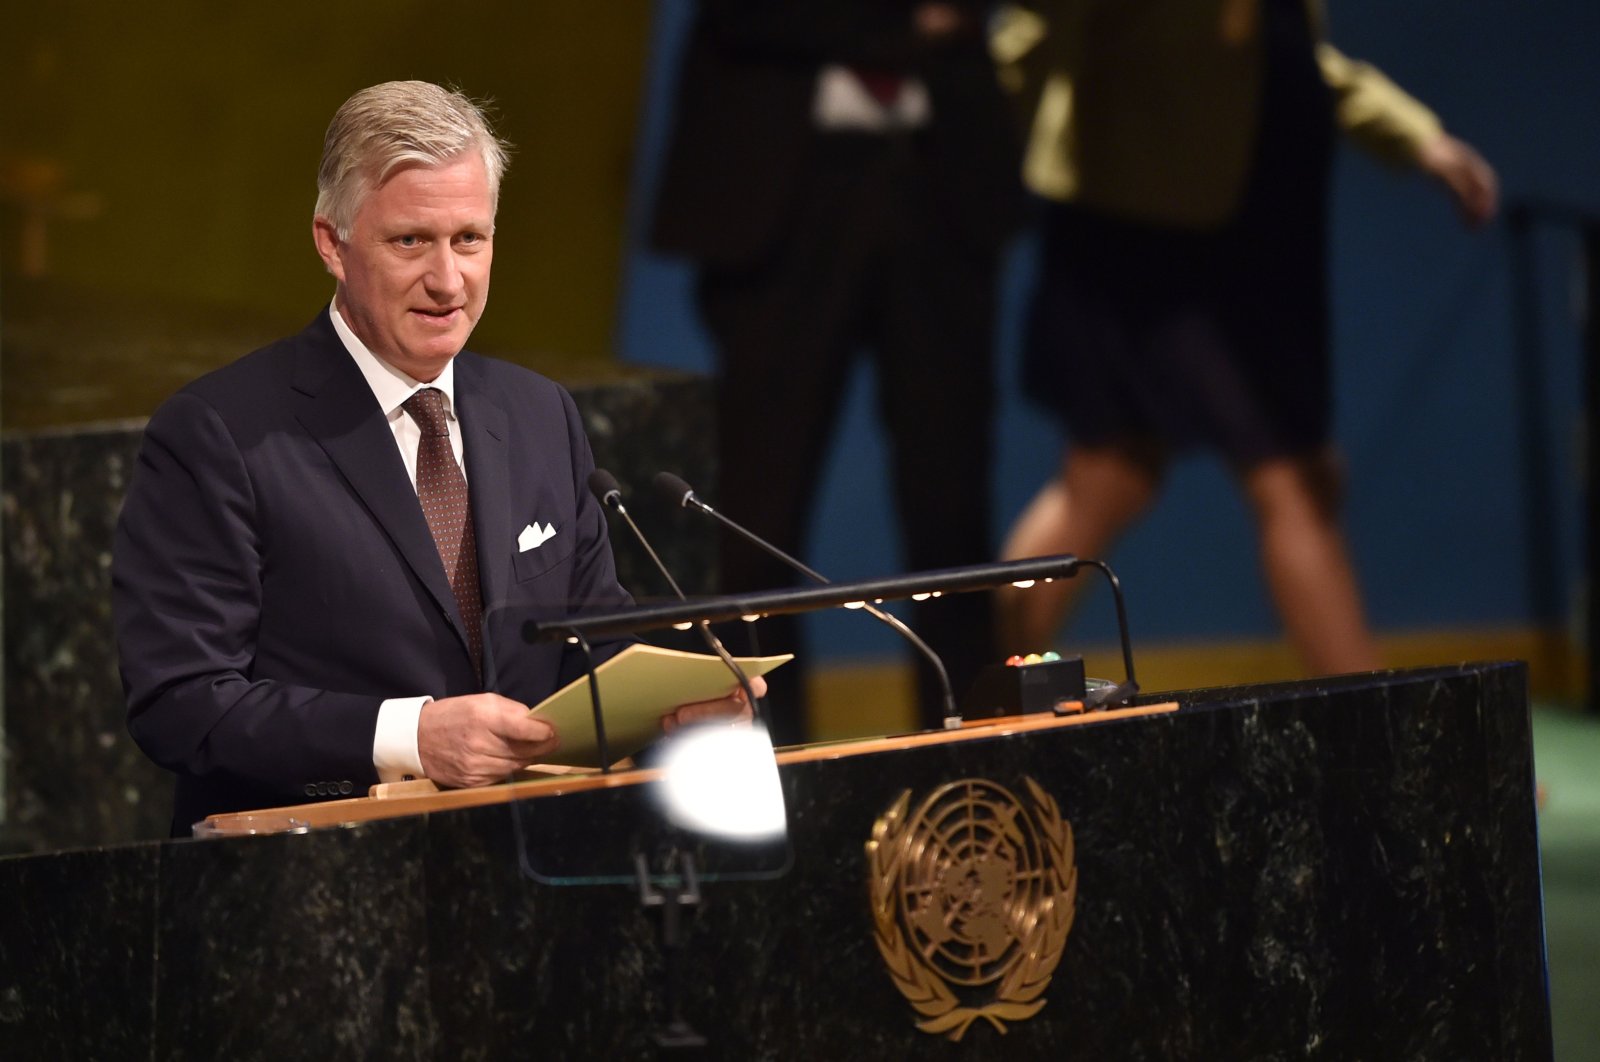 King Philippe of Belgium speaks during the opening session of the 72nd High-Level Meeting on Peacebuilding and Sustaining Peace at United Nations Headquarters in New York, April 24, 2018. (AFP Photo)